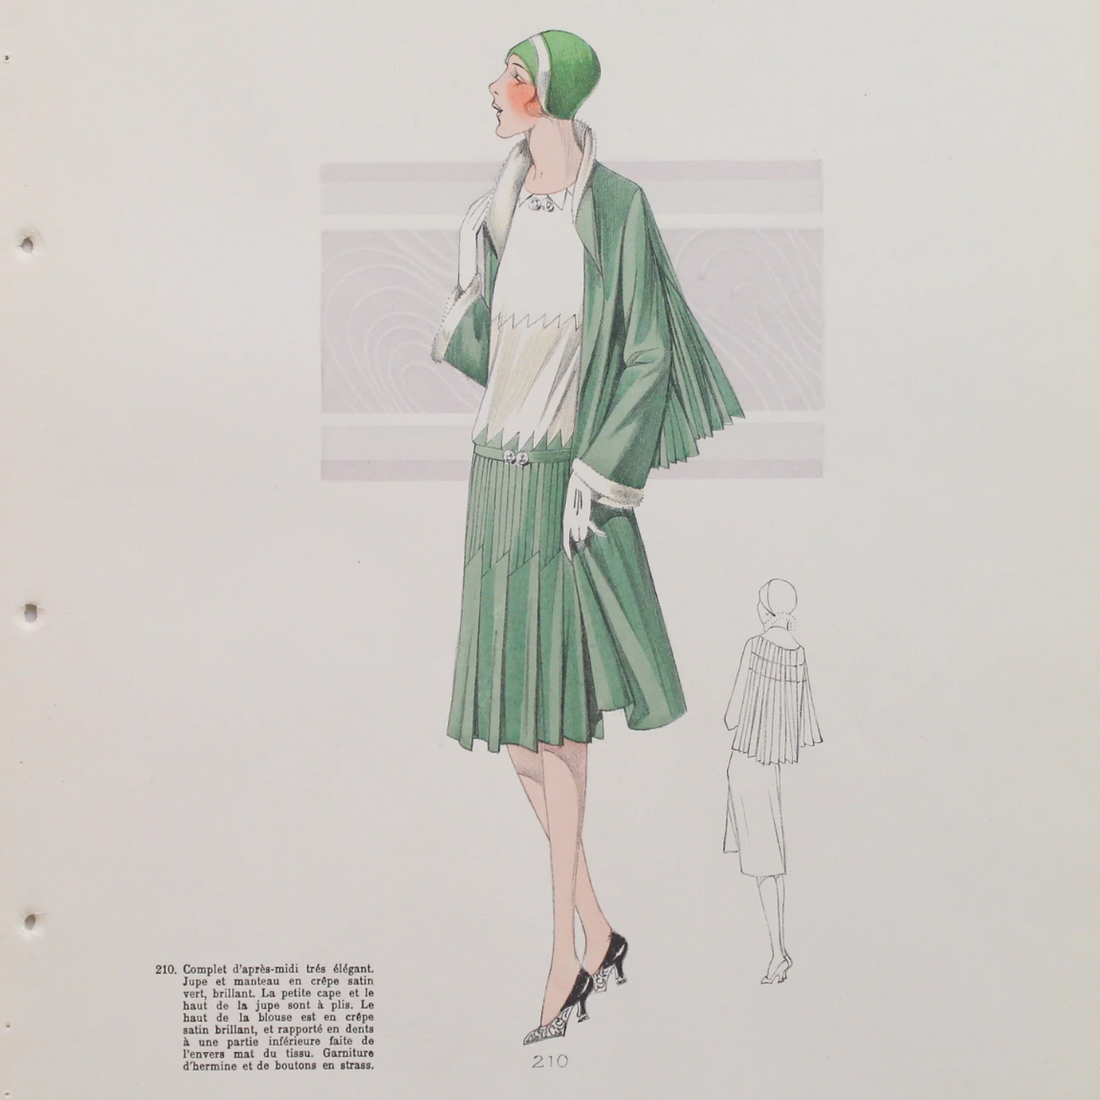 FASHION IN THE 1920s